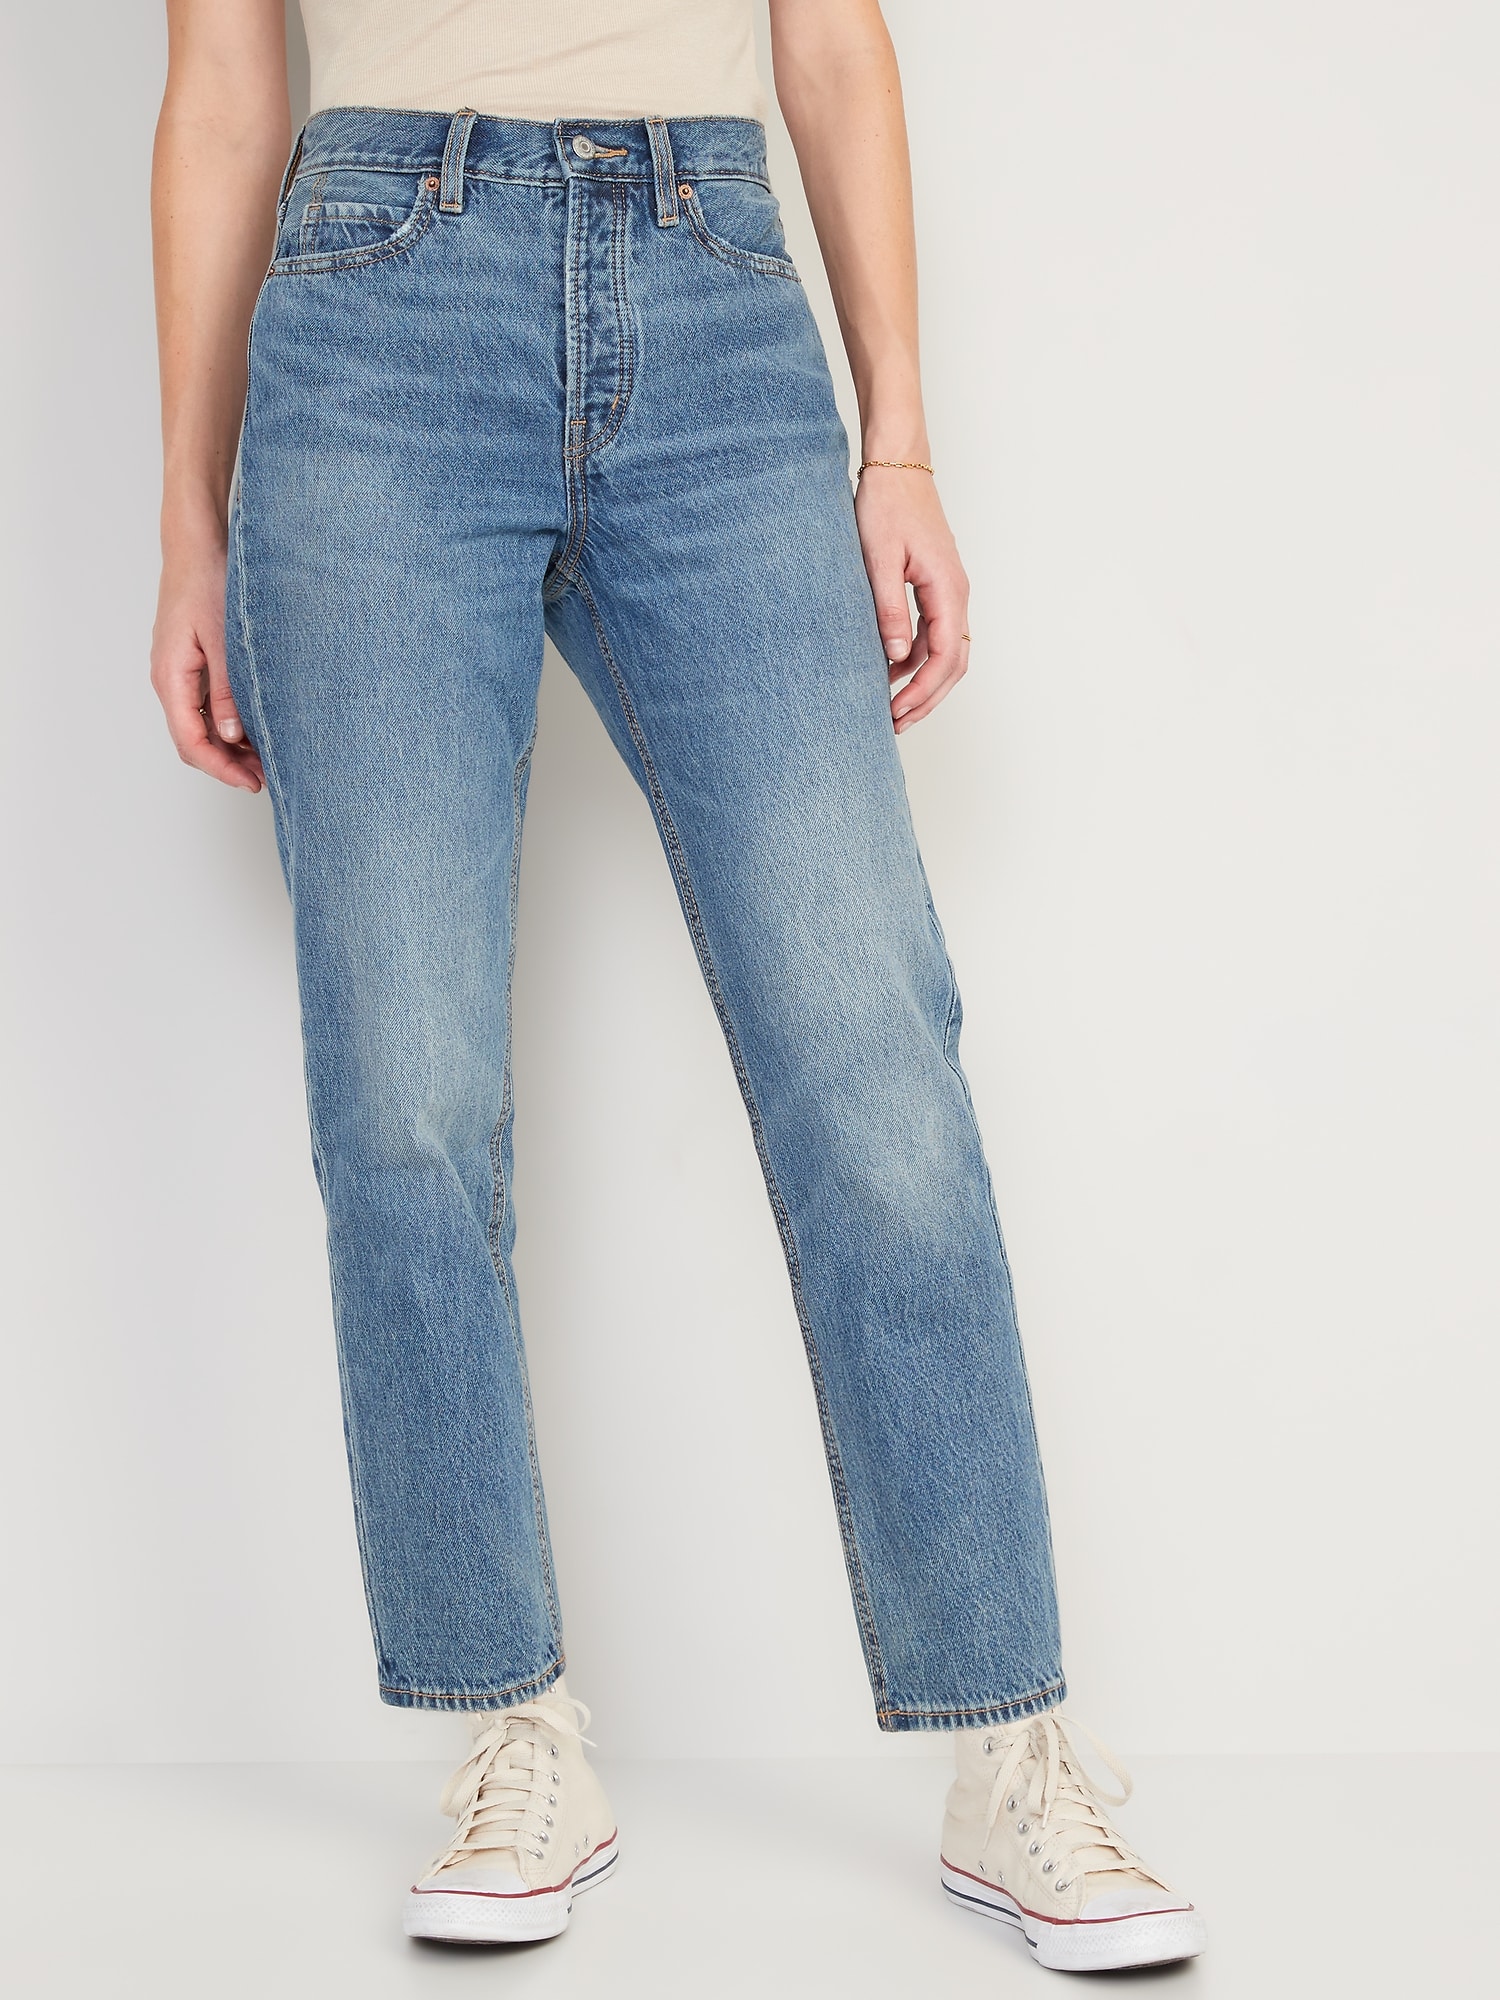 indre Teasing besejret Extra High-Waisted Button-Fly Sky-Hi Straight Non-Stretch Cropped Jeans | Old  Navy